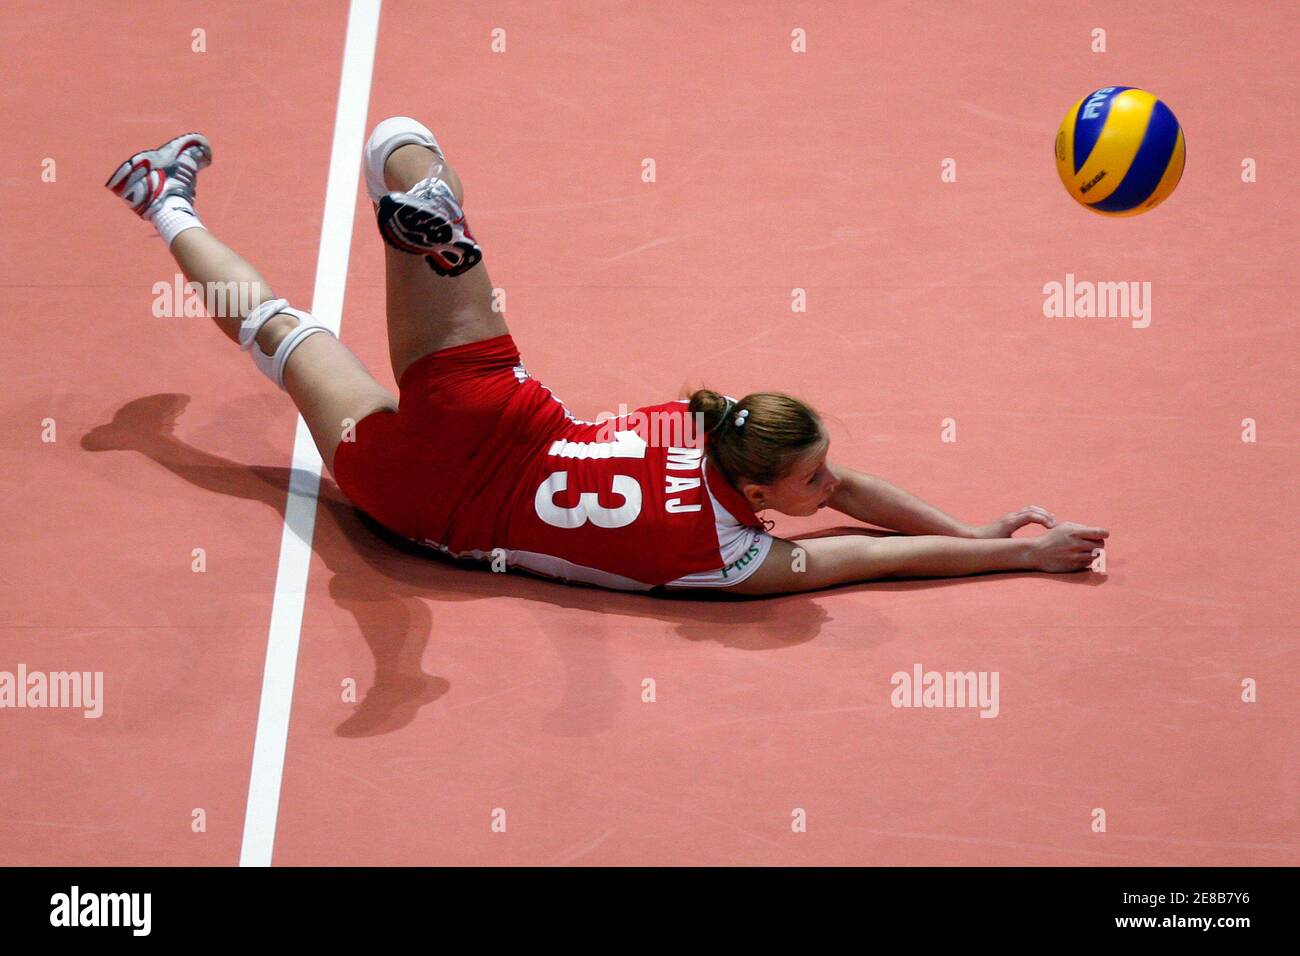 Paulina Maj of Poland falls on the court during the team's FIVB World Grand Prix women's volleyball match against the Dominican Republic in Hong Kong August 16, 2009.       REUTERS/Tyrone Siu    (CHINA SPORT VOLLEYBALL) Stock Photo